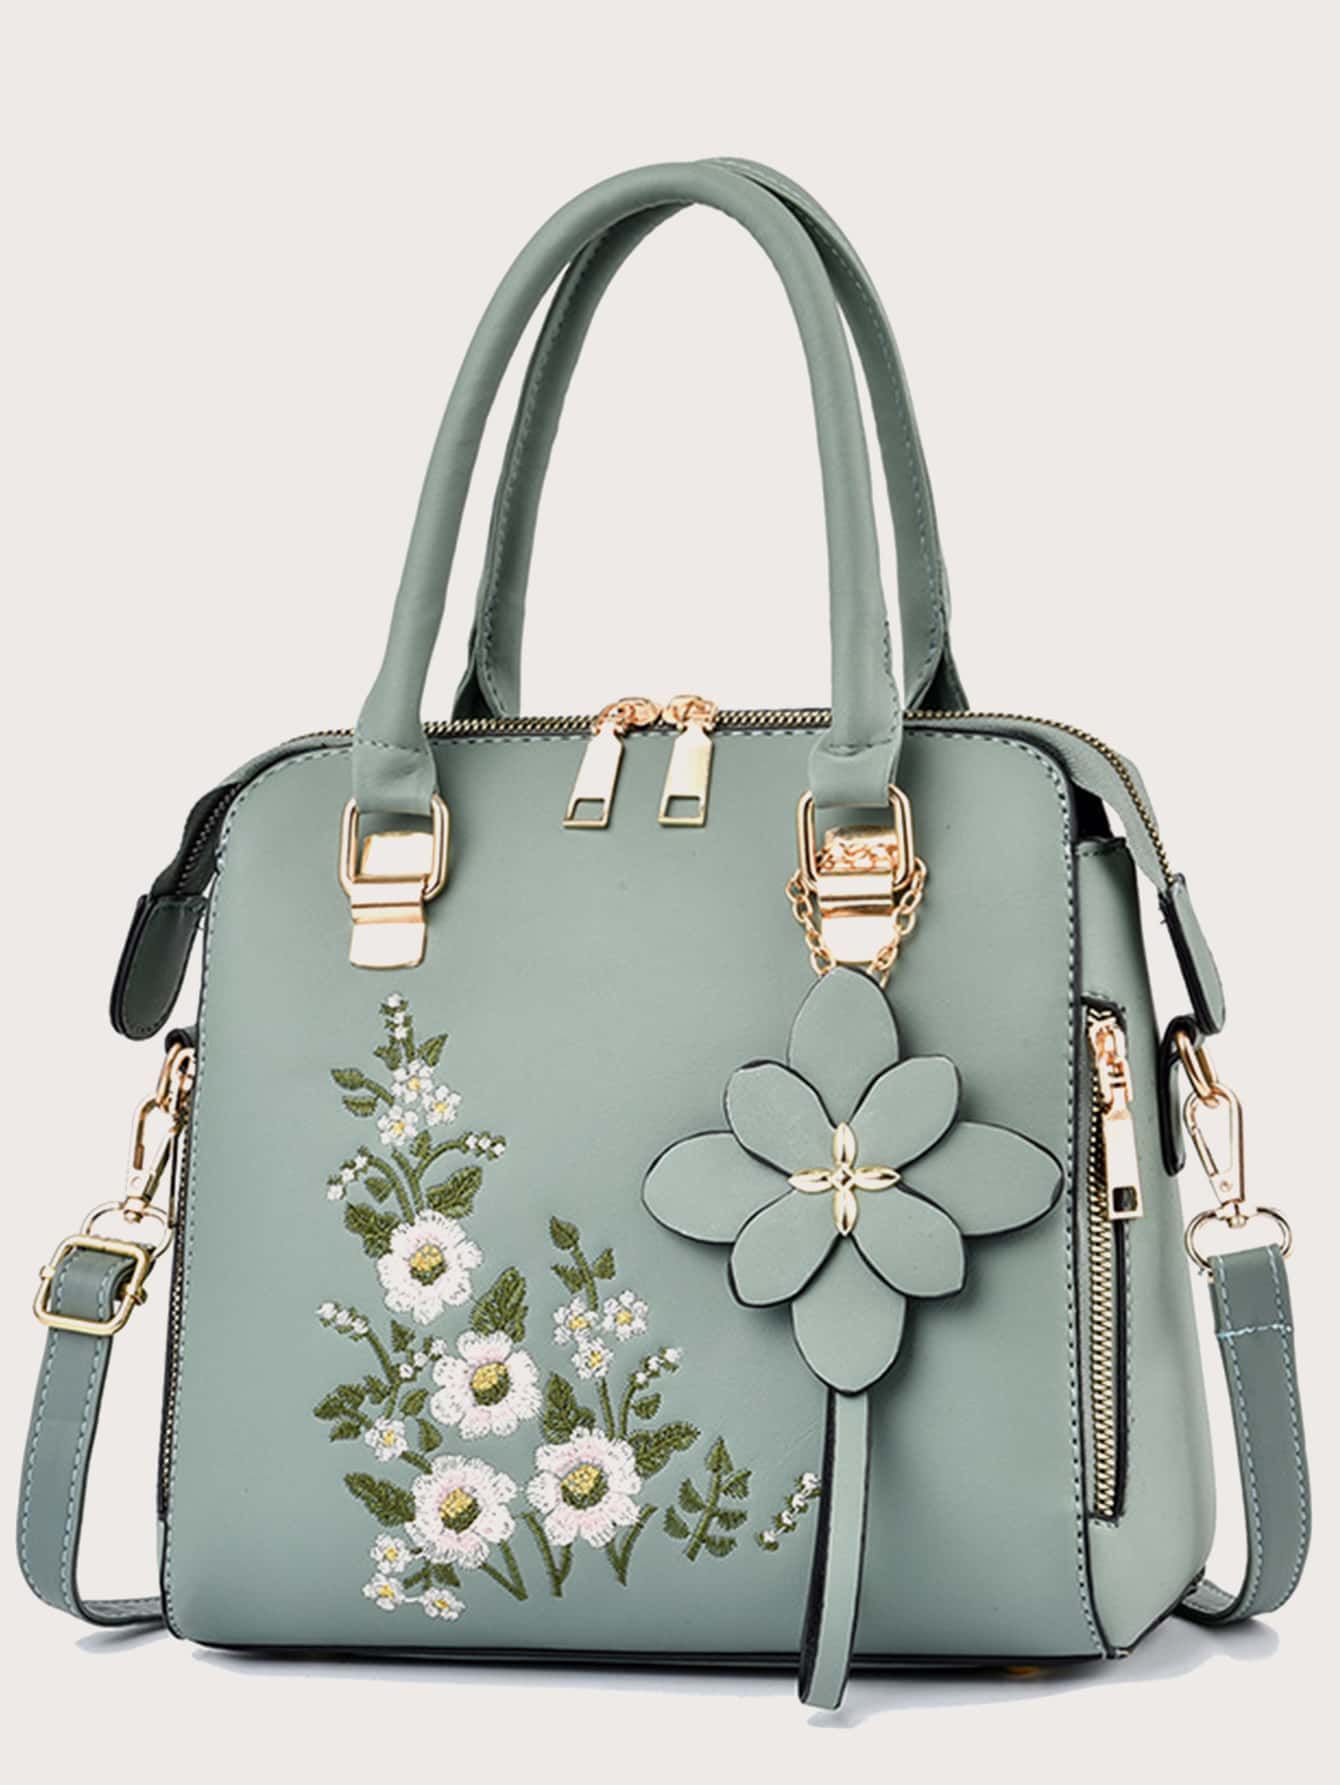 EMERY ROSE Floral Embroidery Square Bag With Floral Bag Charm | SHEIN